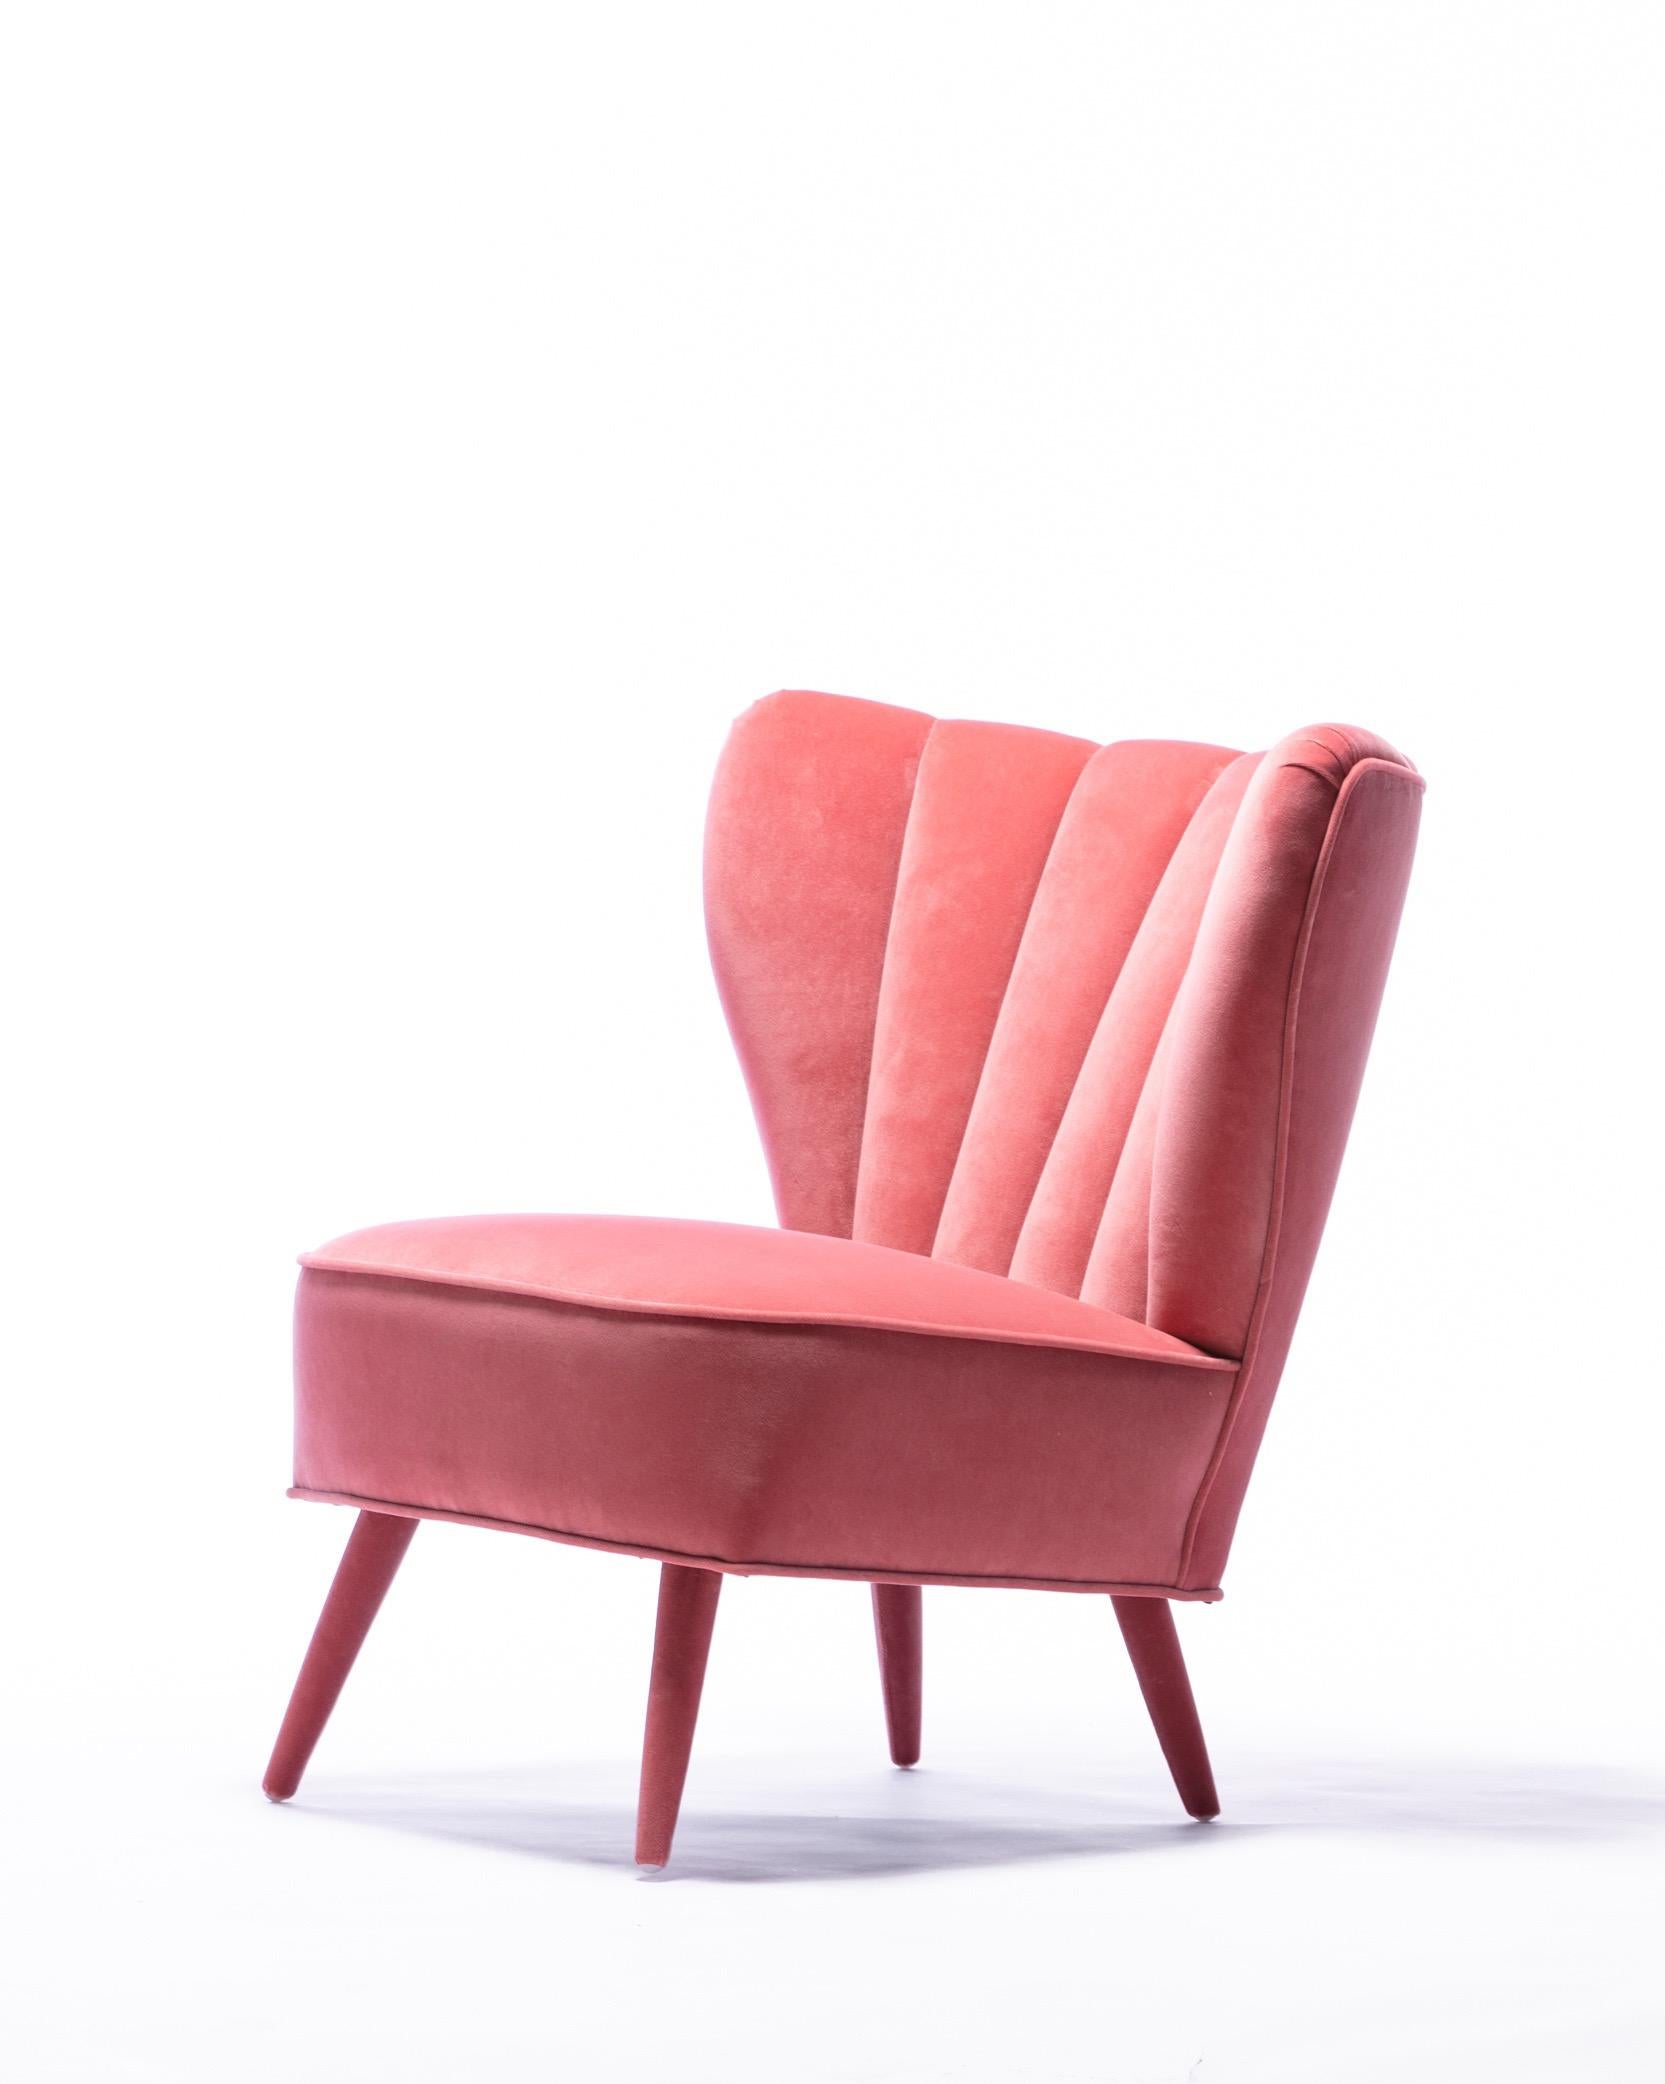 rose pink chair